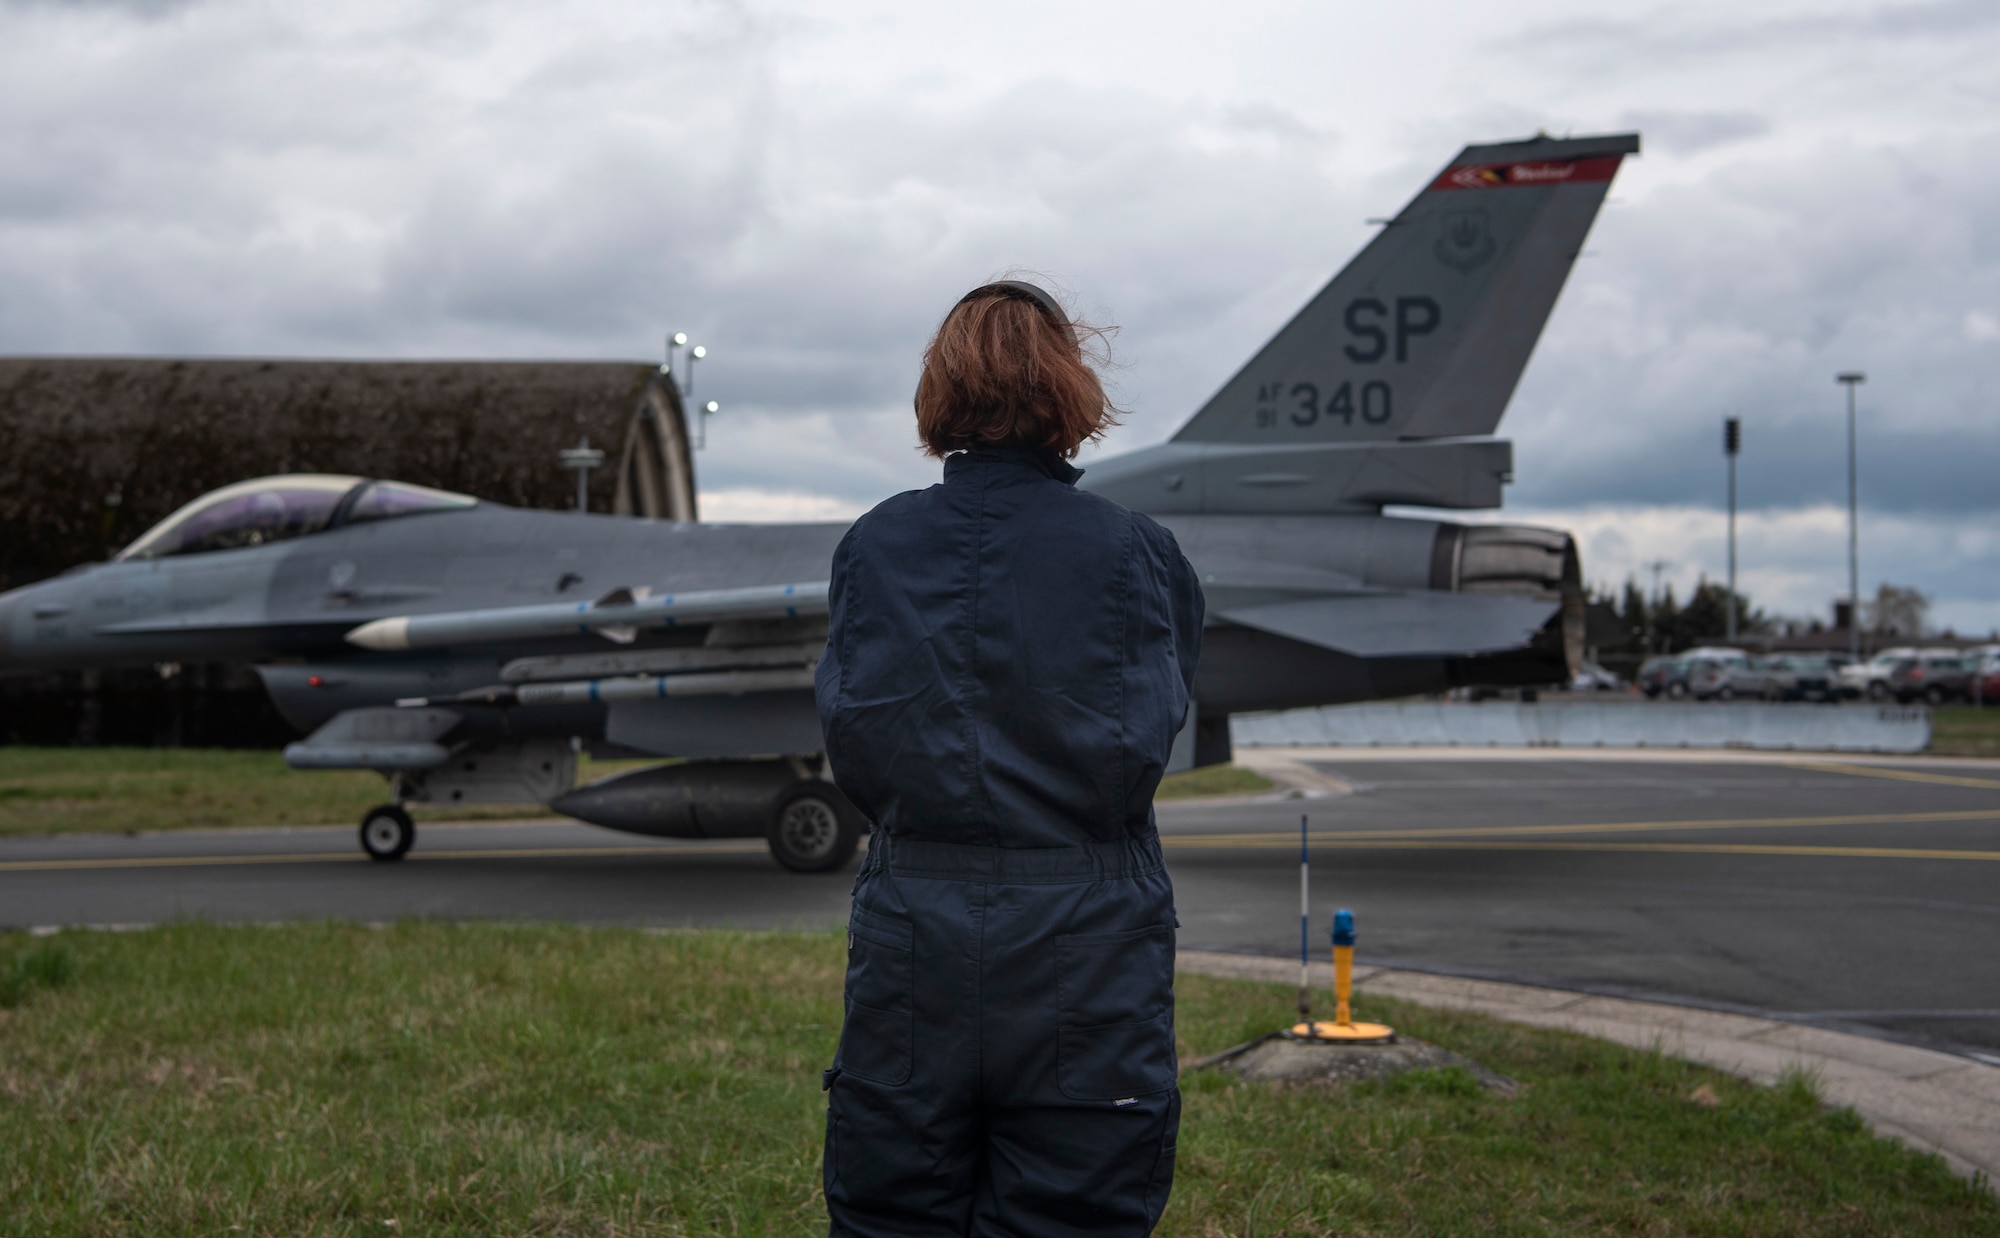 U.S. Air Force Staff Sgt. Stephanie Gillie, 52nd Security Forces Squadron investigator, watches an F-16 Fighting Falcon taxi at Spangdahlem Air Base, Germany, April 3, 2019. Gillie volunteered to participate in the 52nd Aircraft Maintenance Squadron Crew Chief for a Day program for a better understanding of flightline operations. She had never been on a flightline or near fighter jets before this opportunity. (U.S. Air Force photo by Airman 1st Class Valerie Seelye)